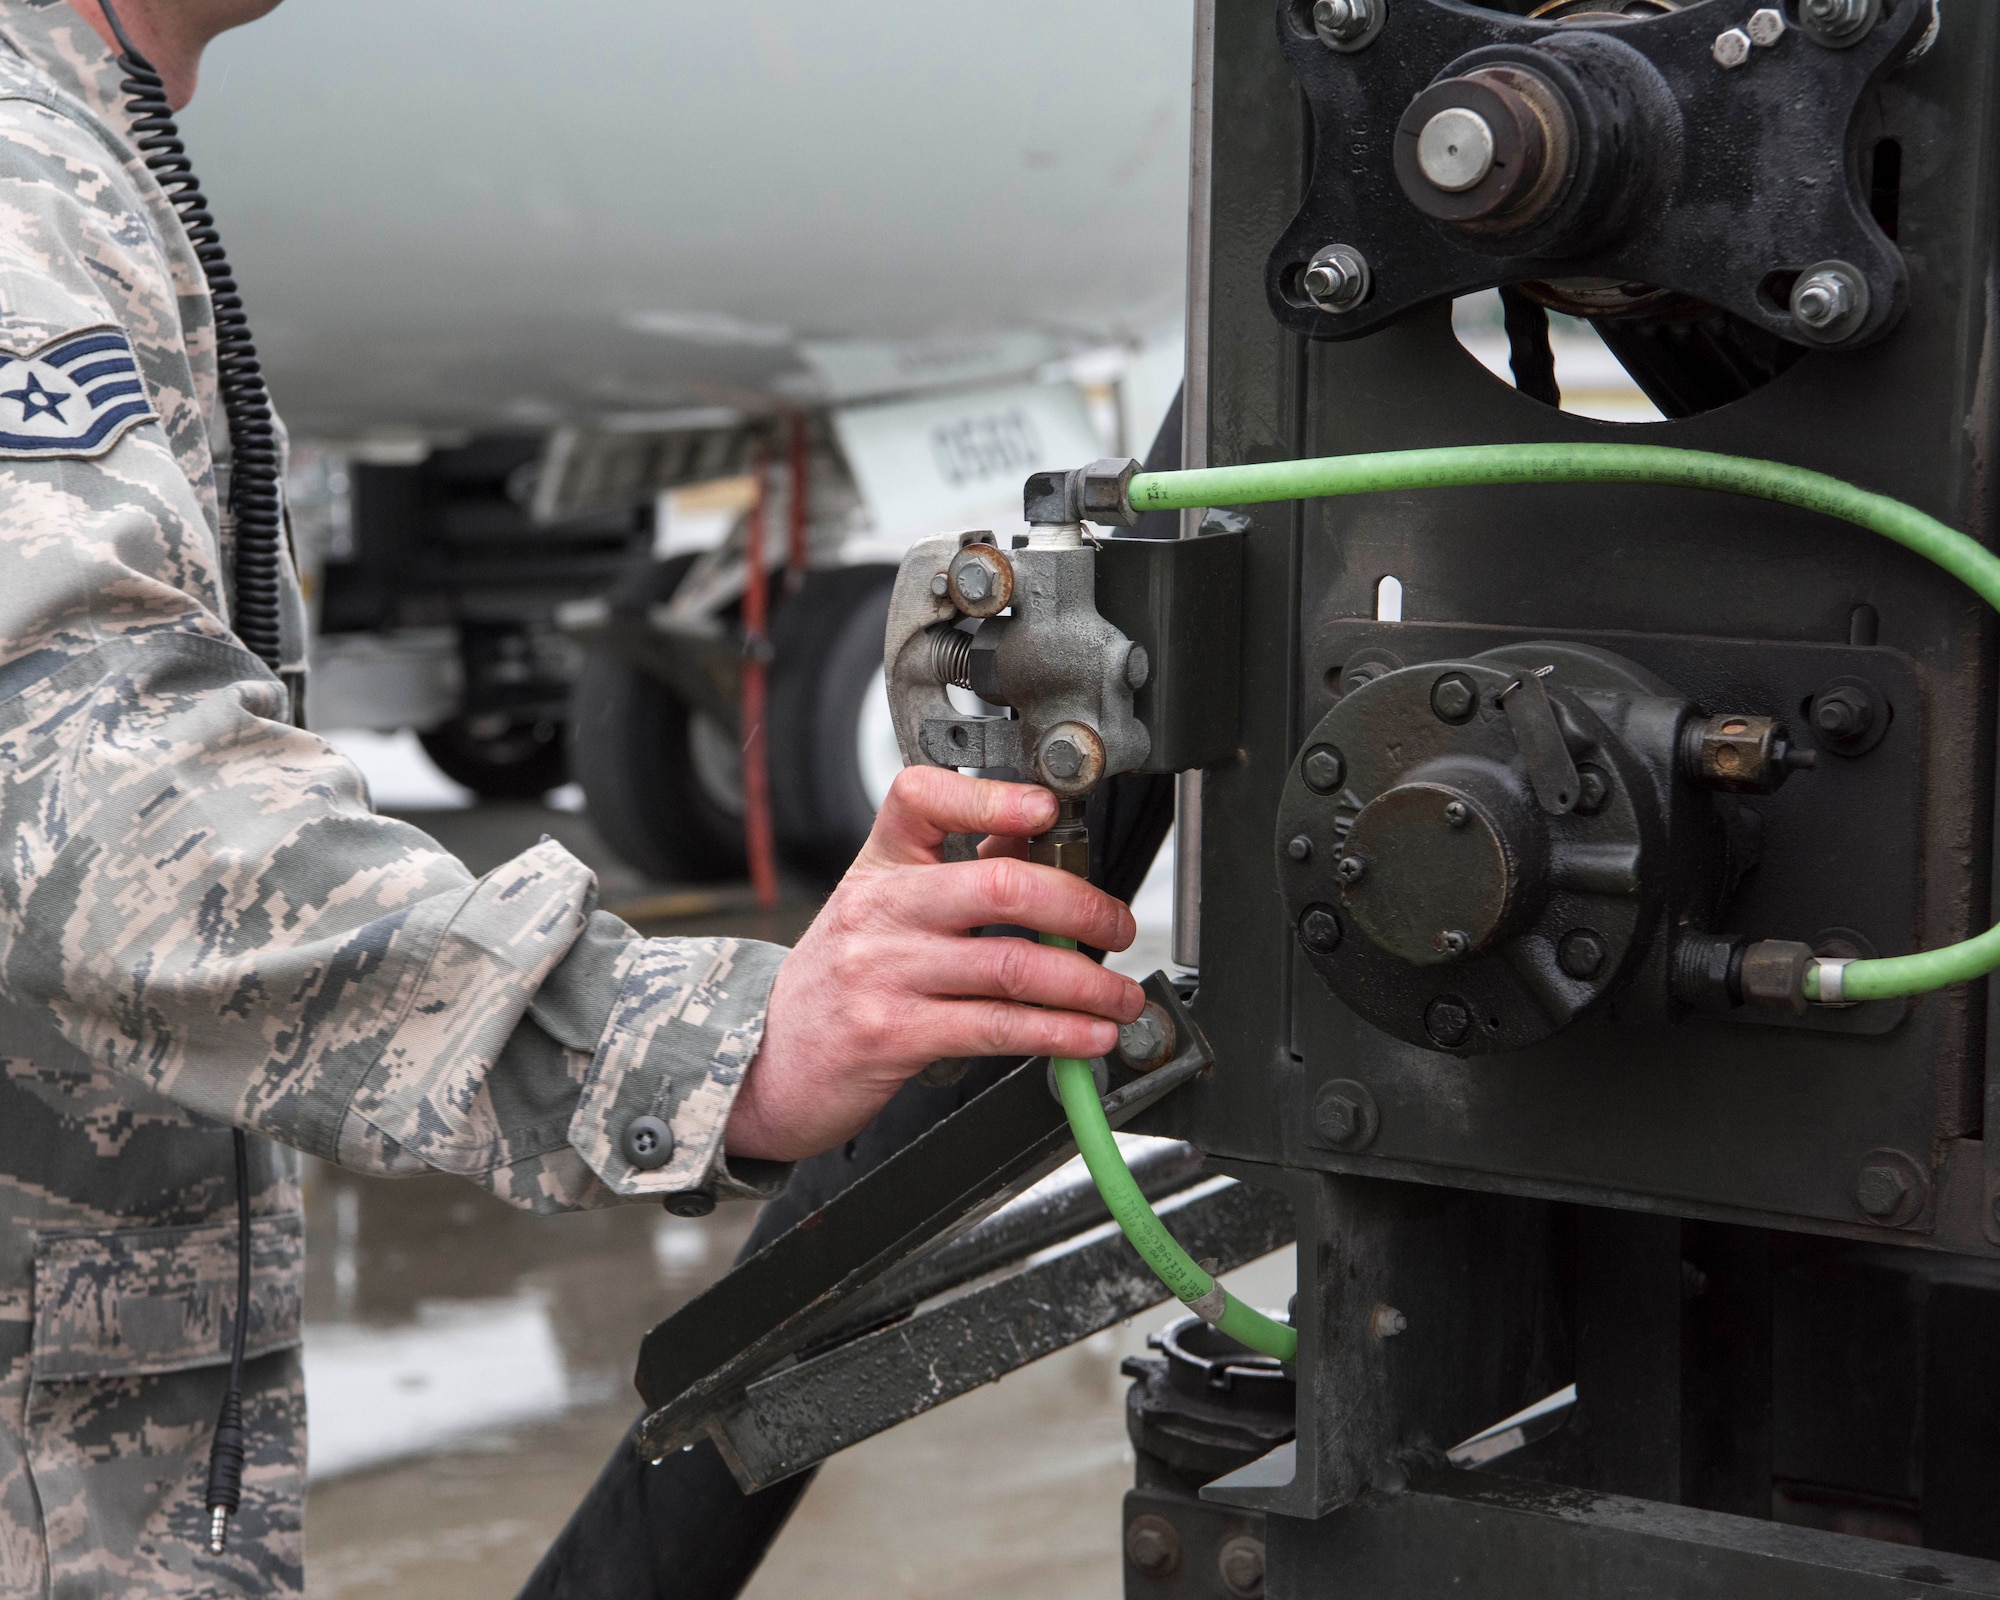 U.S. Air Force Staff Sgt. Matthew Kennedy, a 962nd Aircraft Maintenance Unit E-3 Sentry crew chief, reels in a fuel hose after refueling an E-3 Sentry at Joint Base Elmendorf-Richardson, Alaska, July 25, 2018. Kennedy is responsible for service and repair on everything coming back from daily inspections, to include things like oil, hydraulics and fueling the jet.